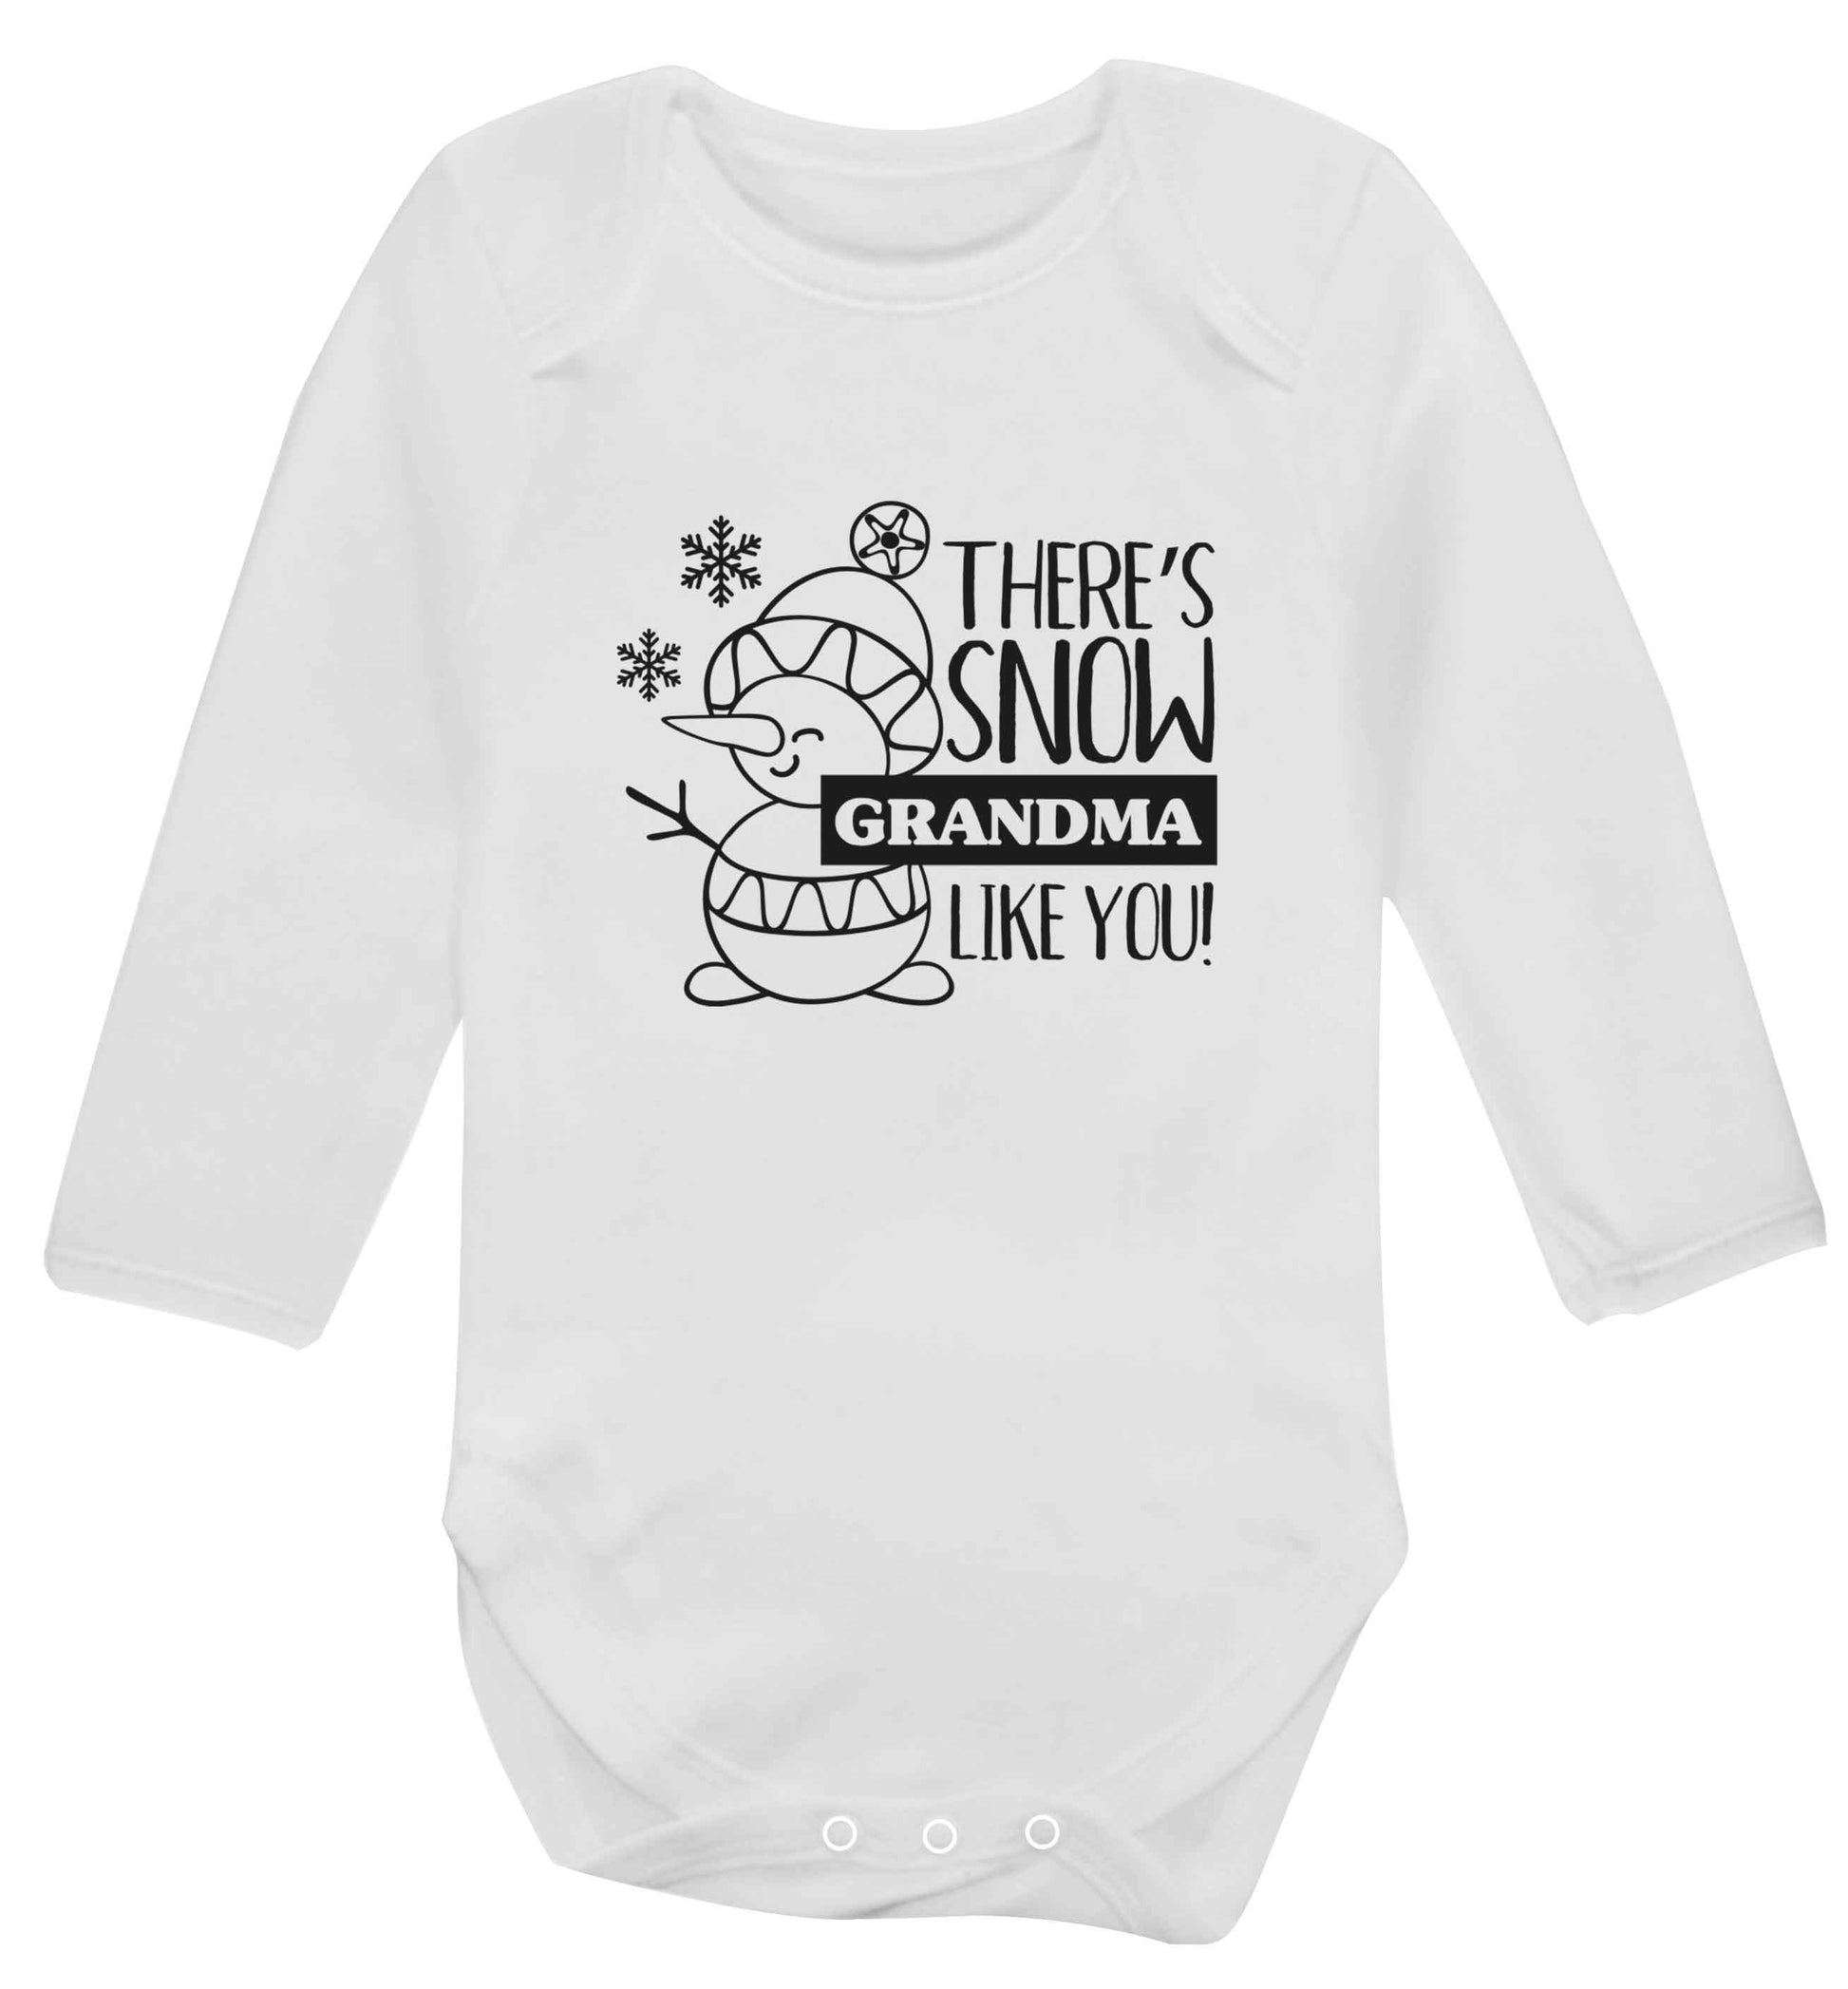 There's snow grandma like you baby vest long sleeved white 6-12 months